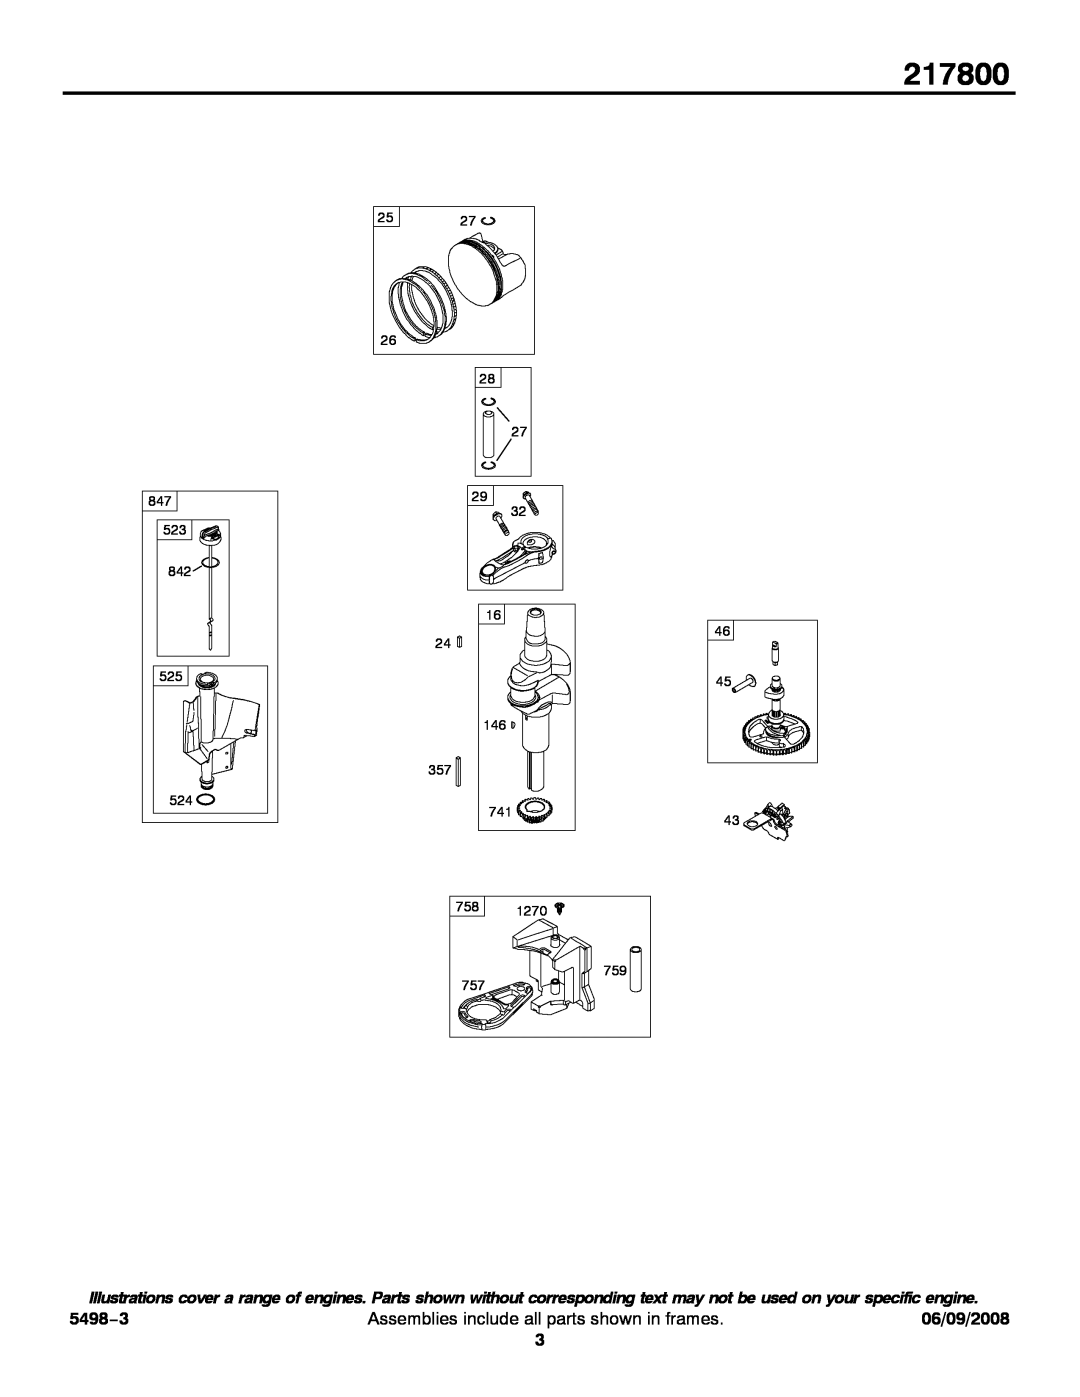 Briggs & Stratton 217800 service manual 5498−3, Assemblies include all parts shown in frames, 06/09/2008 